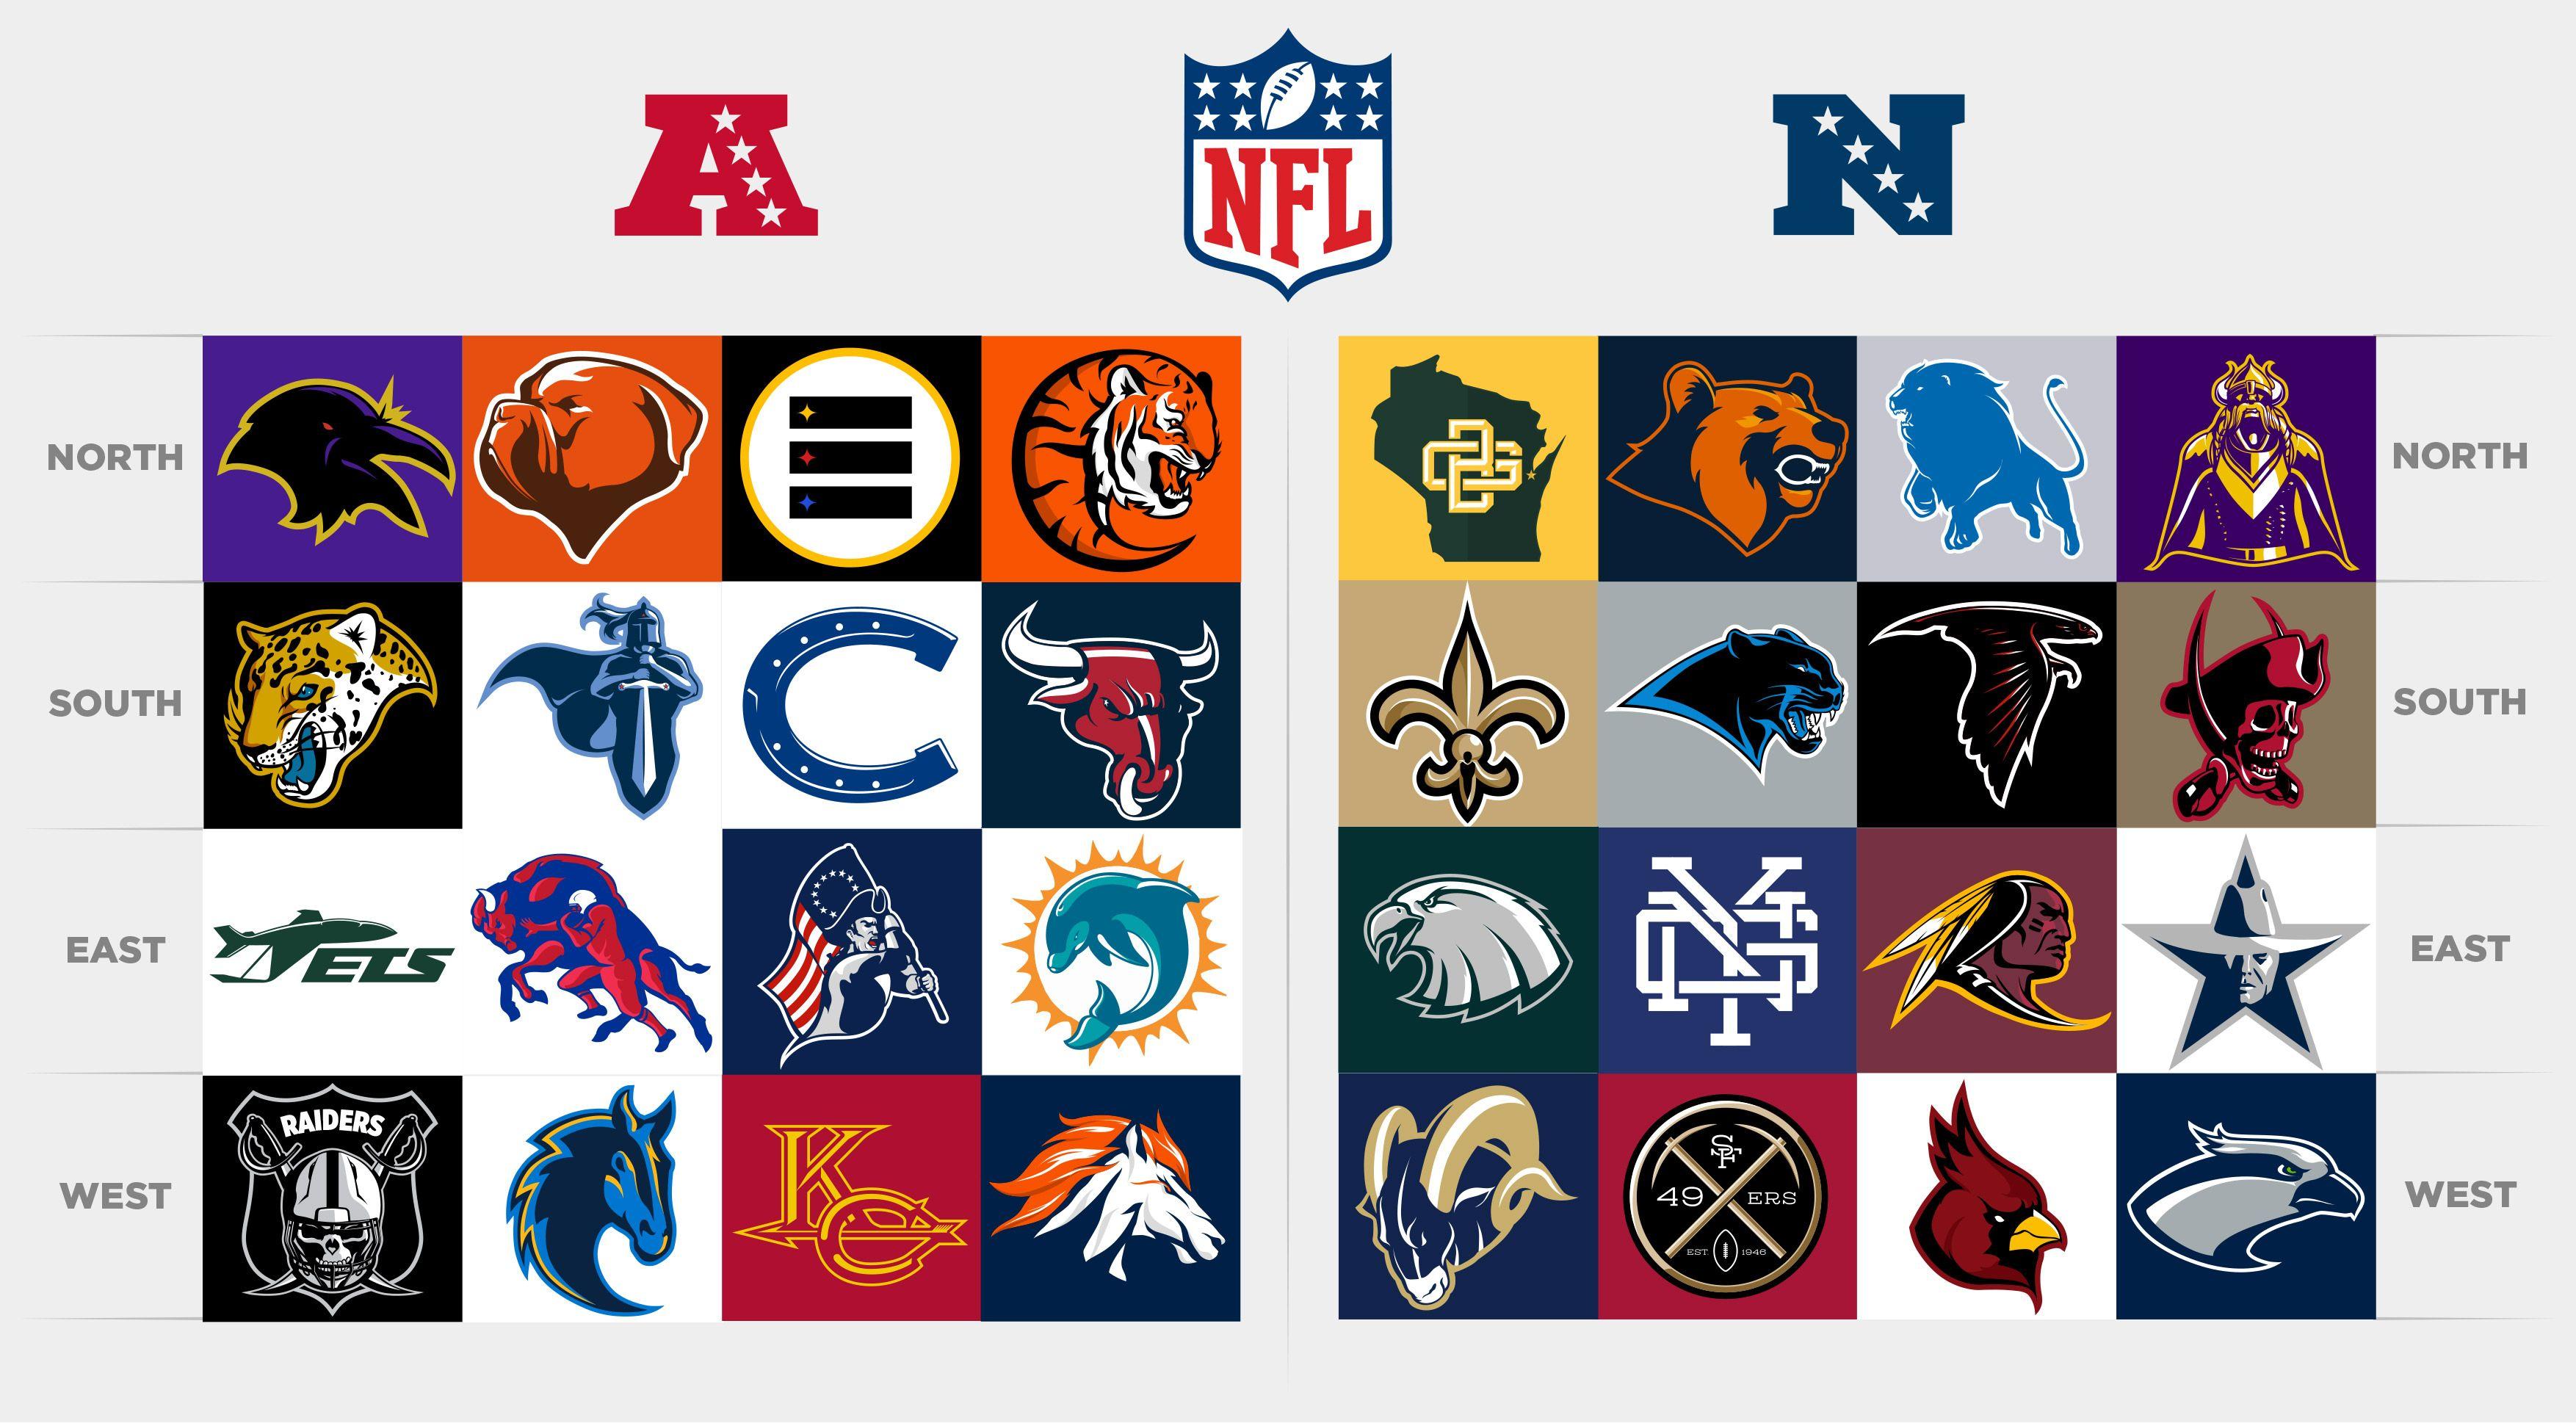 Old NFL Logo - Check Out (And Nitpick) These Redesigned NFL Logos